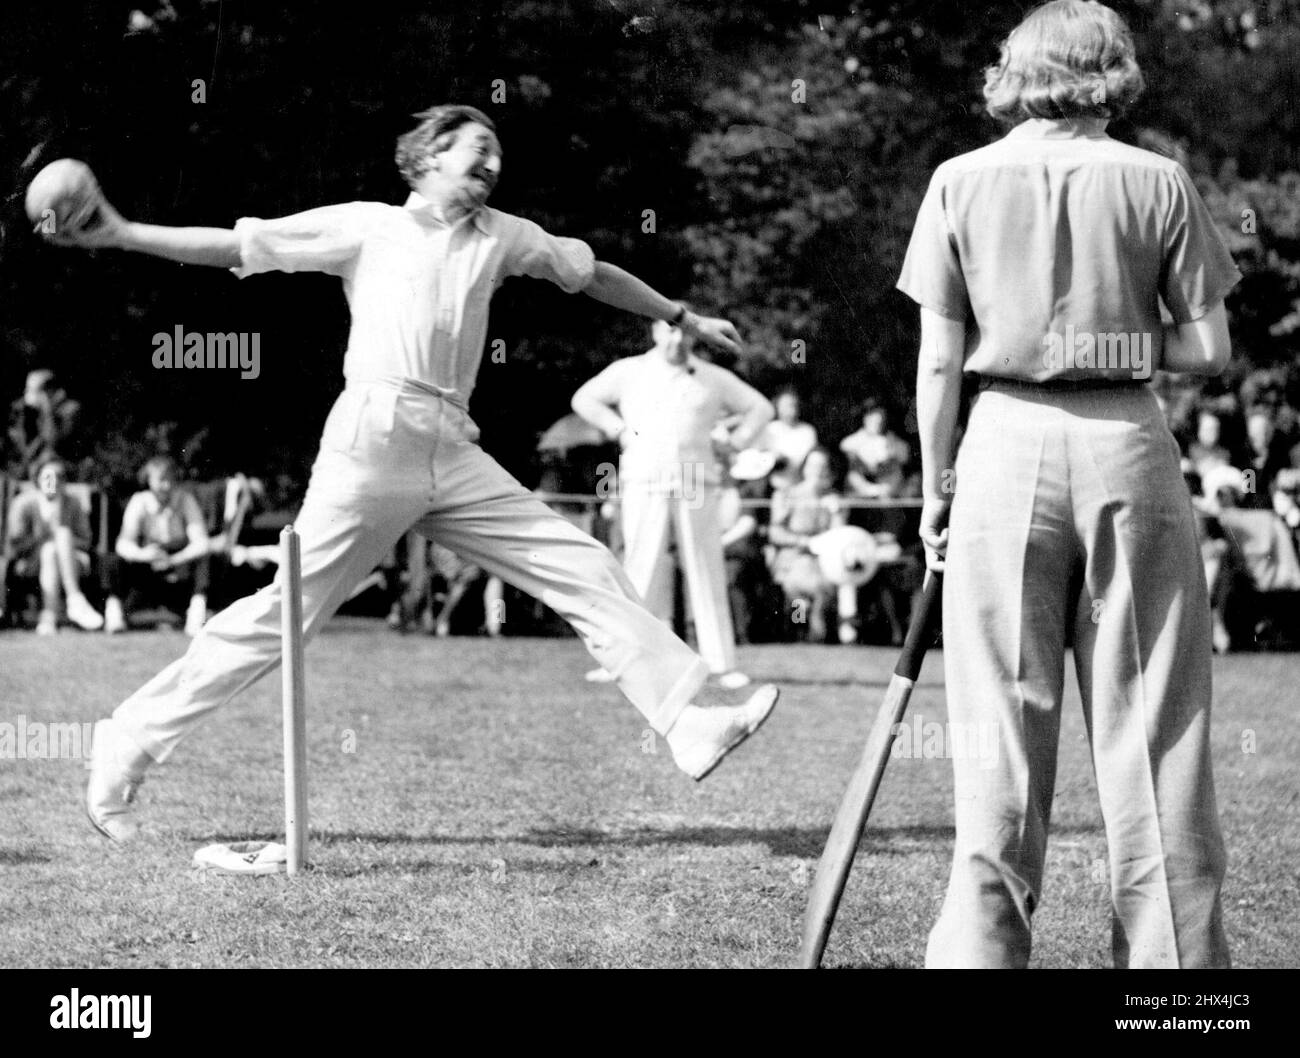 Cricket Match Between Authors and Actresses. A.P. Herbert Bowling. Standing At the Wicket is Miss C. Stewart. The annual cricket match between authors and actresses took place today in Aid of the St. Pancras house improvement Society at West Wing, Outer Circle, Regent's Park. July 25, 1939. (Photo by Keystone). Stock Photo